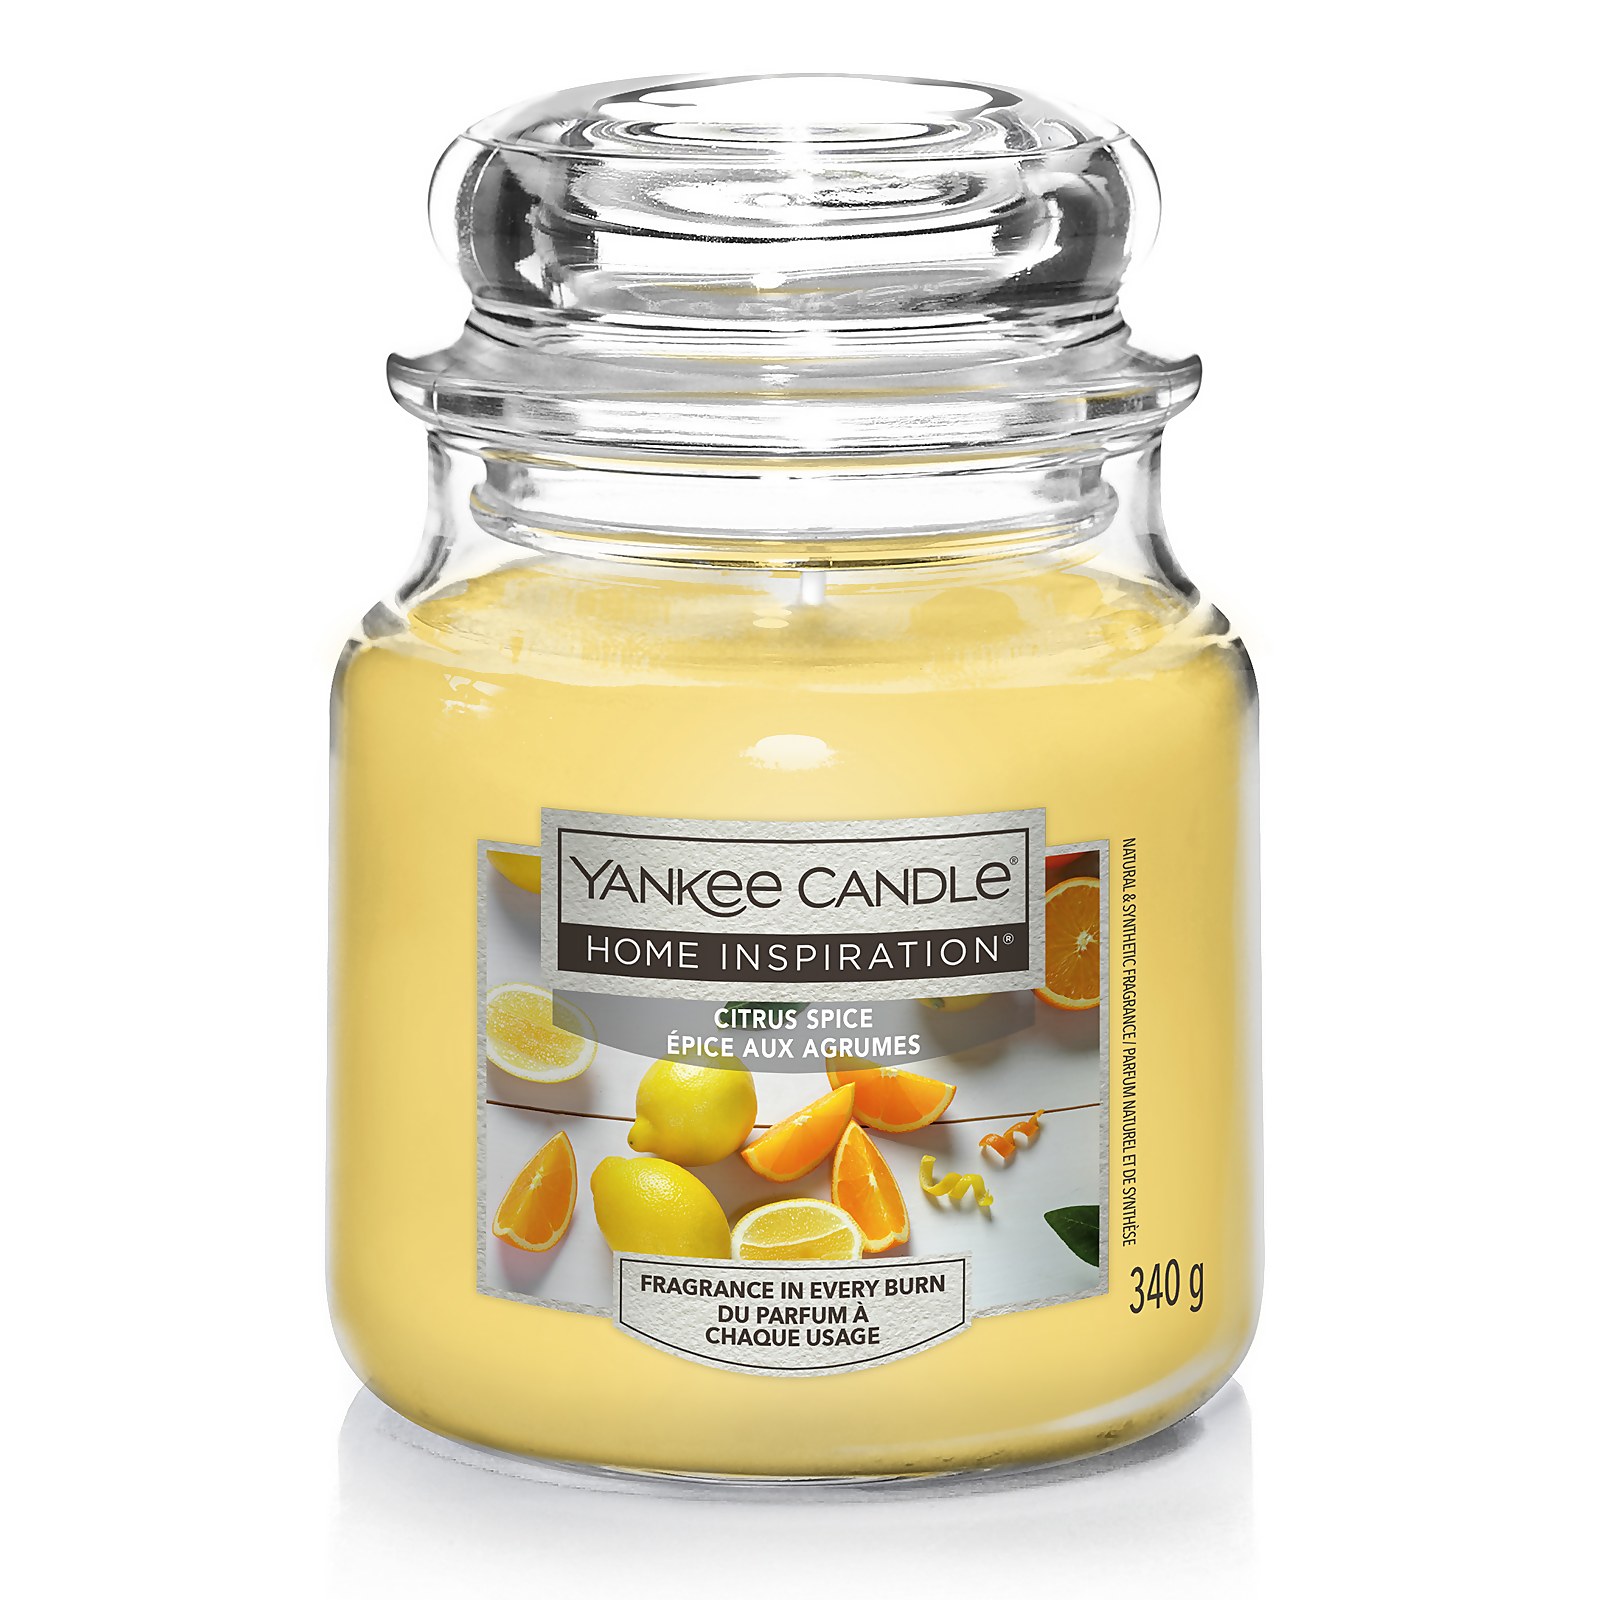 Photo of Yankee Candle Home Inspiration Scented Candle - Medium Jar - Cirtus Spice